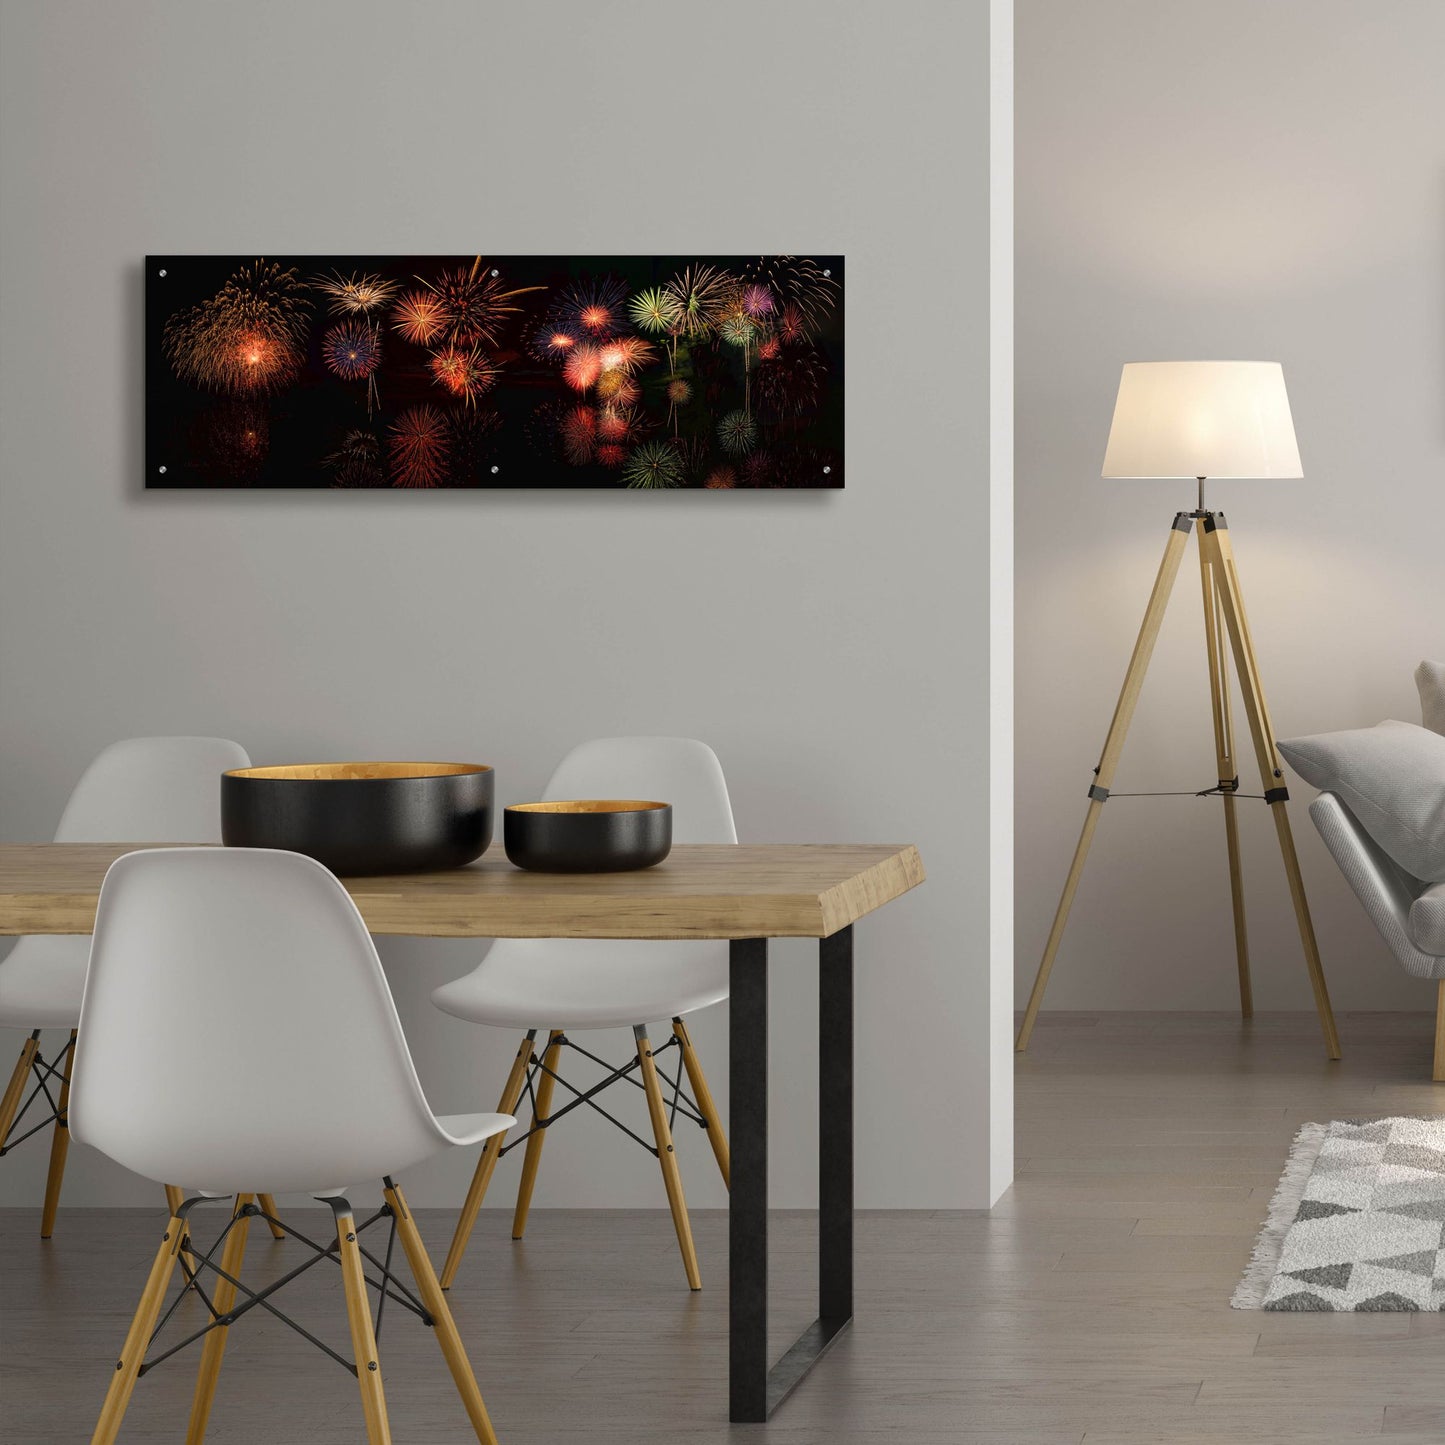 Epic Art 'Fireworks Reflection In Water Panorama' by Lena Owens, Acrylic Glass Wall Art,48x16